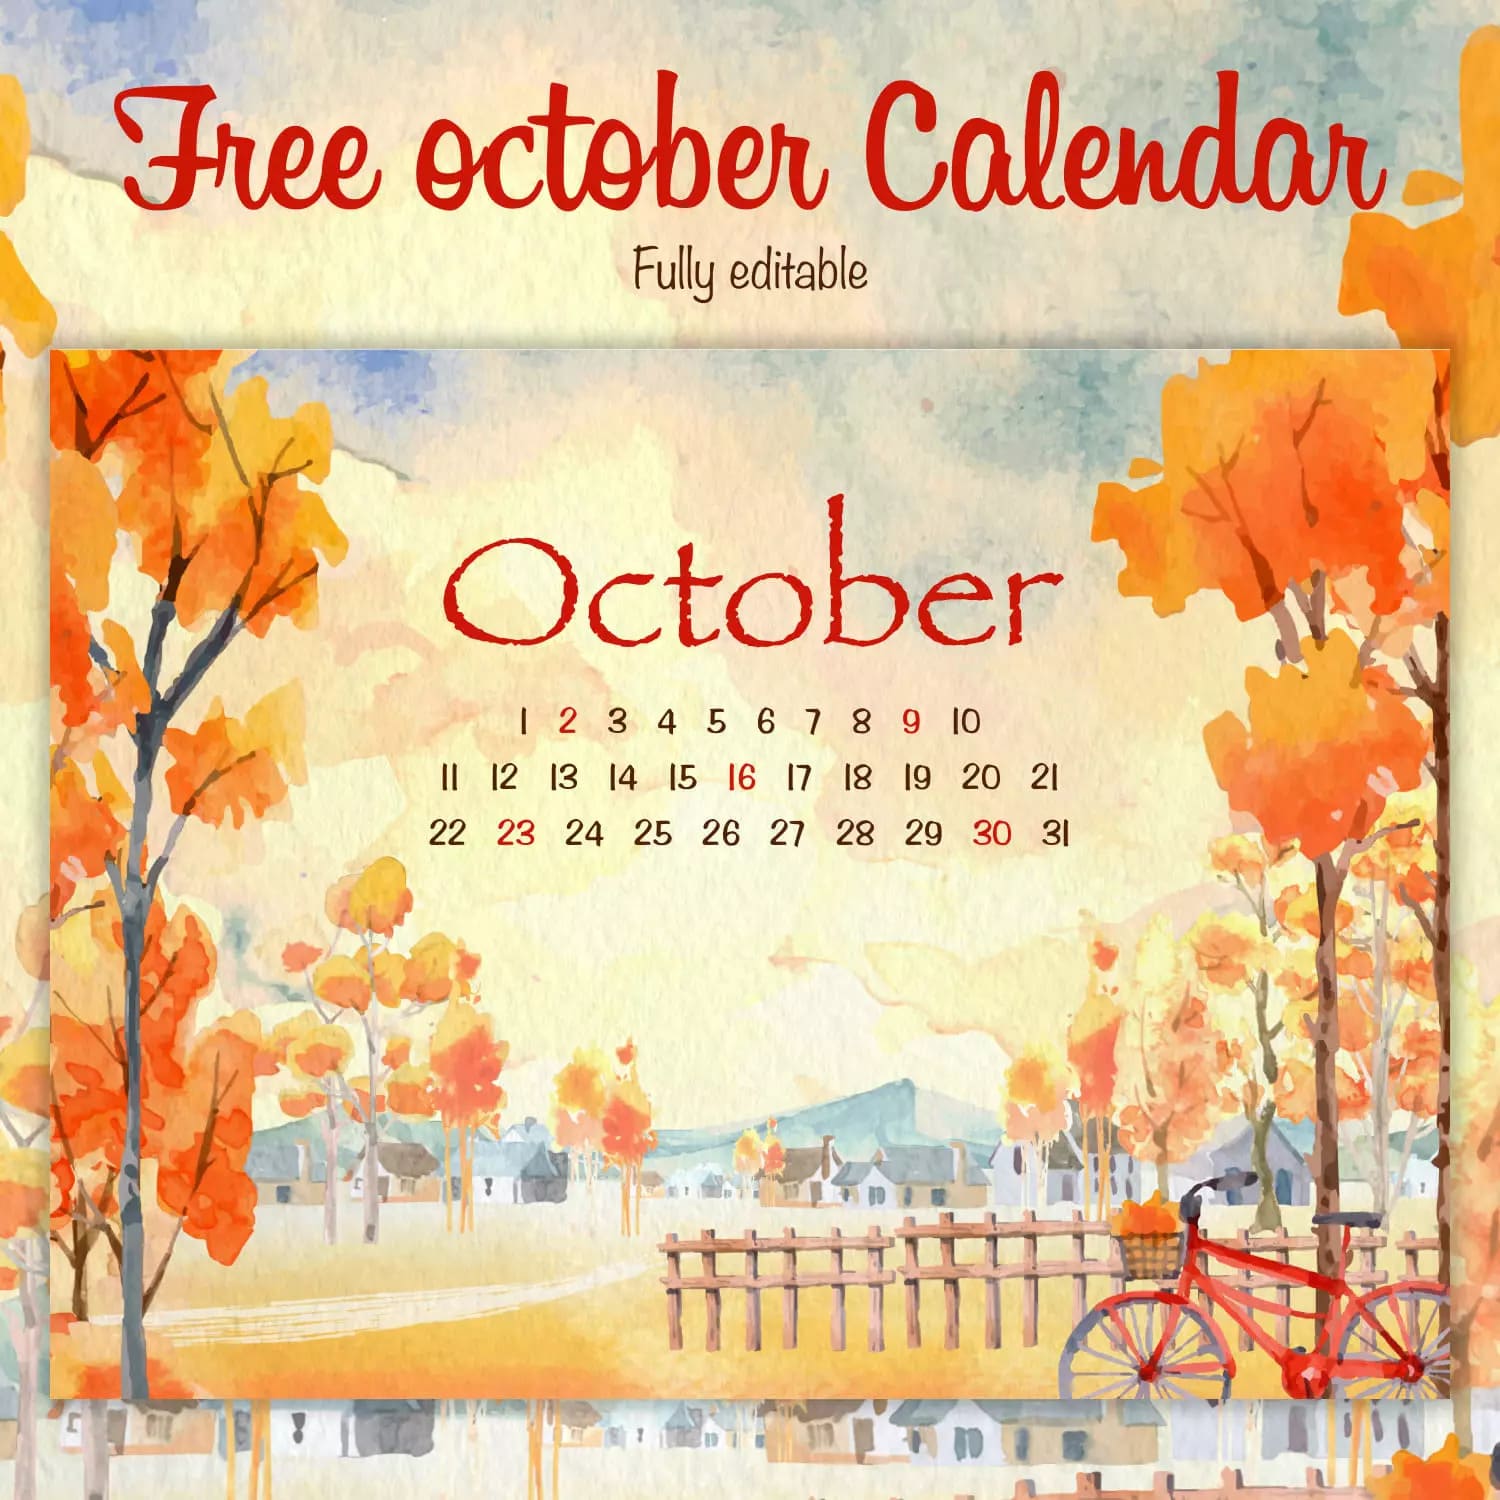 Free Editable Calendar October With Trees Preview.